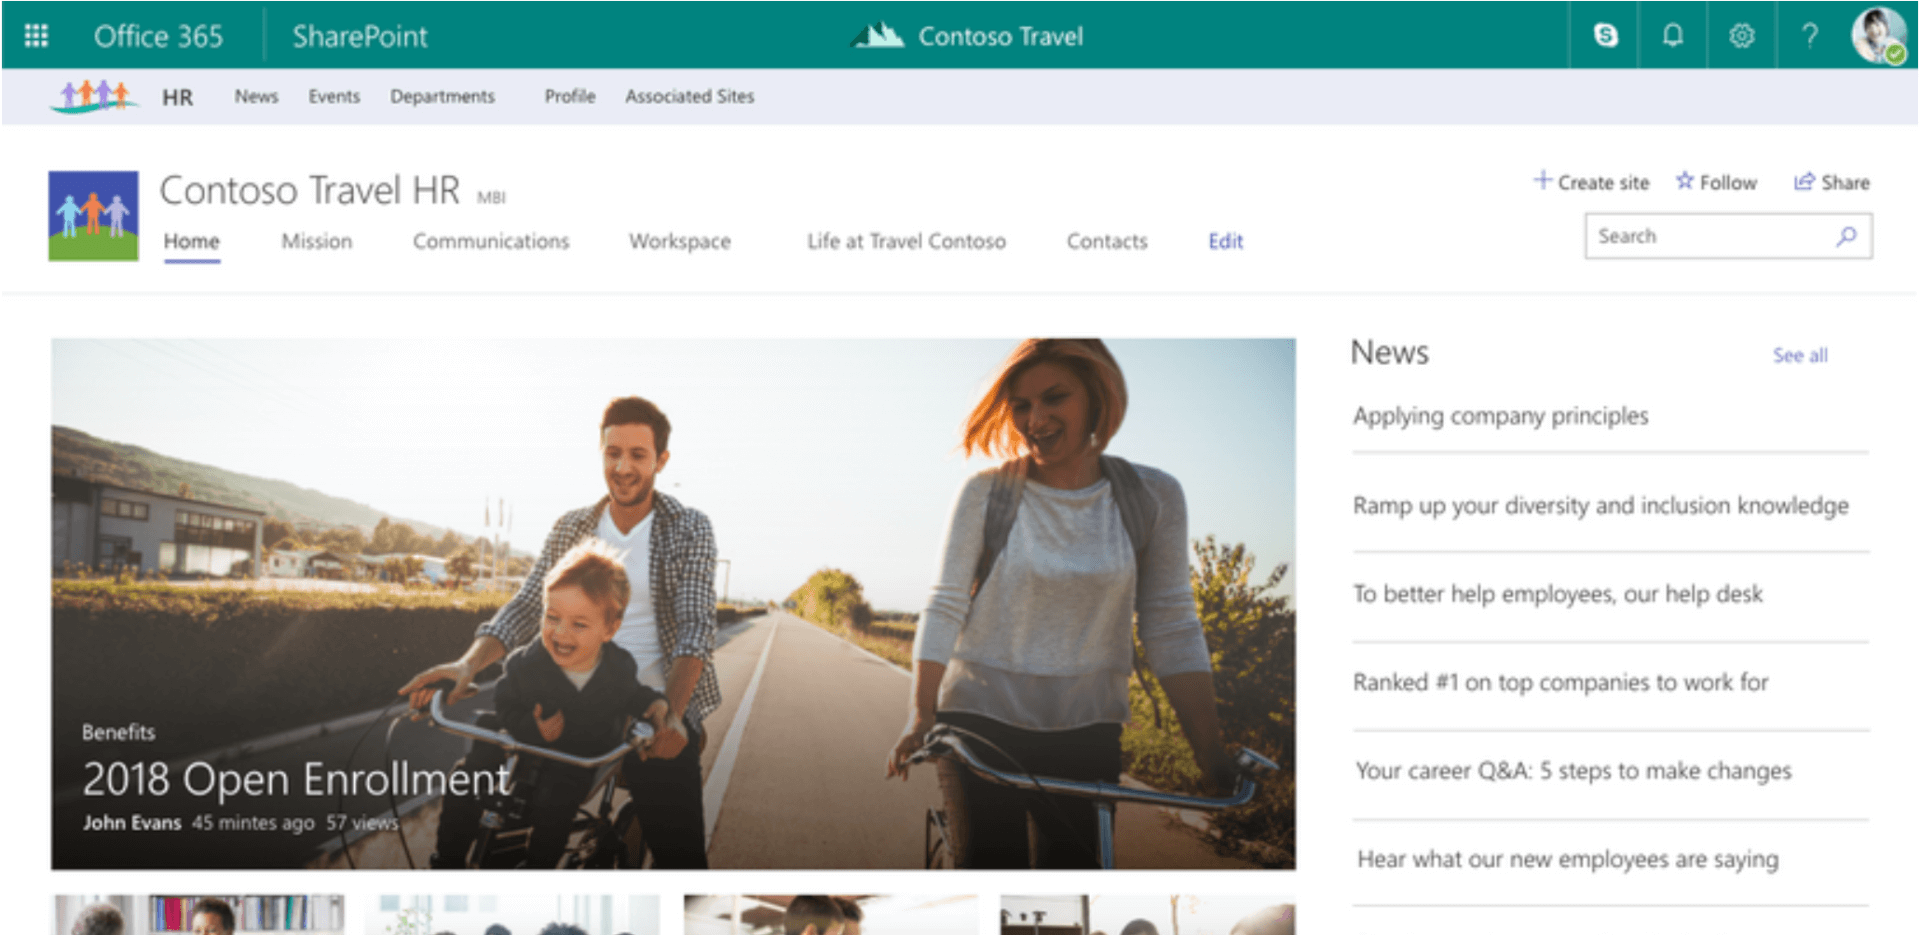 Office 365 SharePoint HR Contoso Travel HR tti 2018 Open Enrollmén€ tOSO Travel News Ramp up our Ranked •l cornpanies to for S Steps to what are 